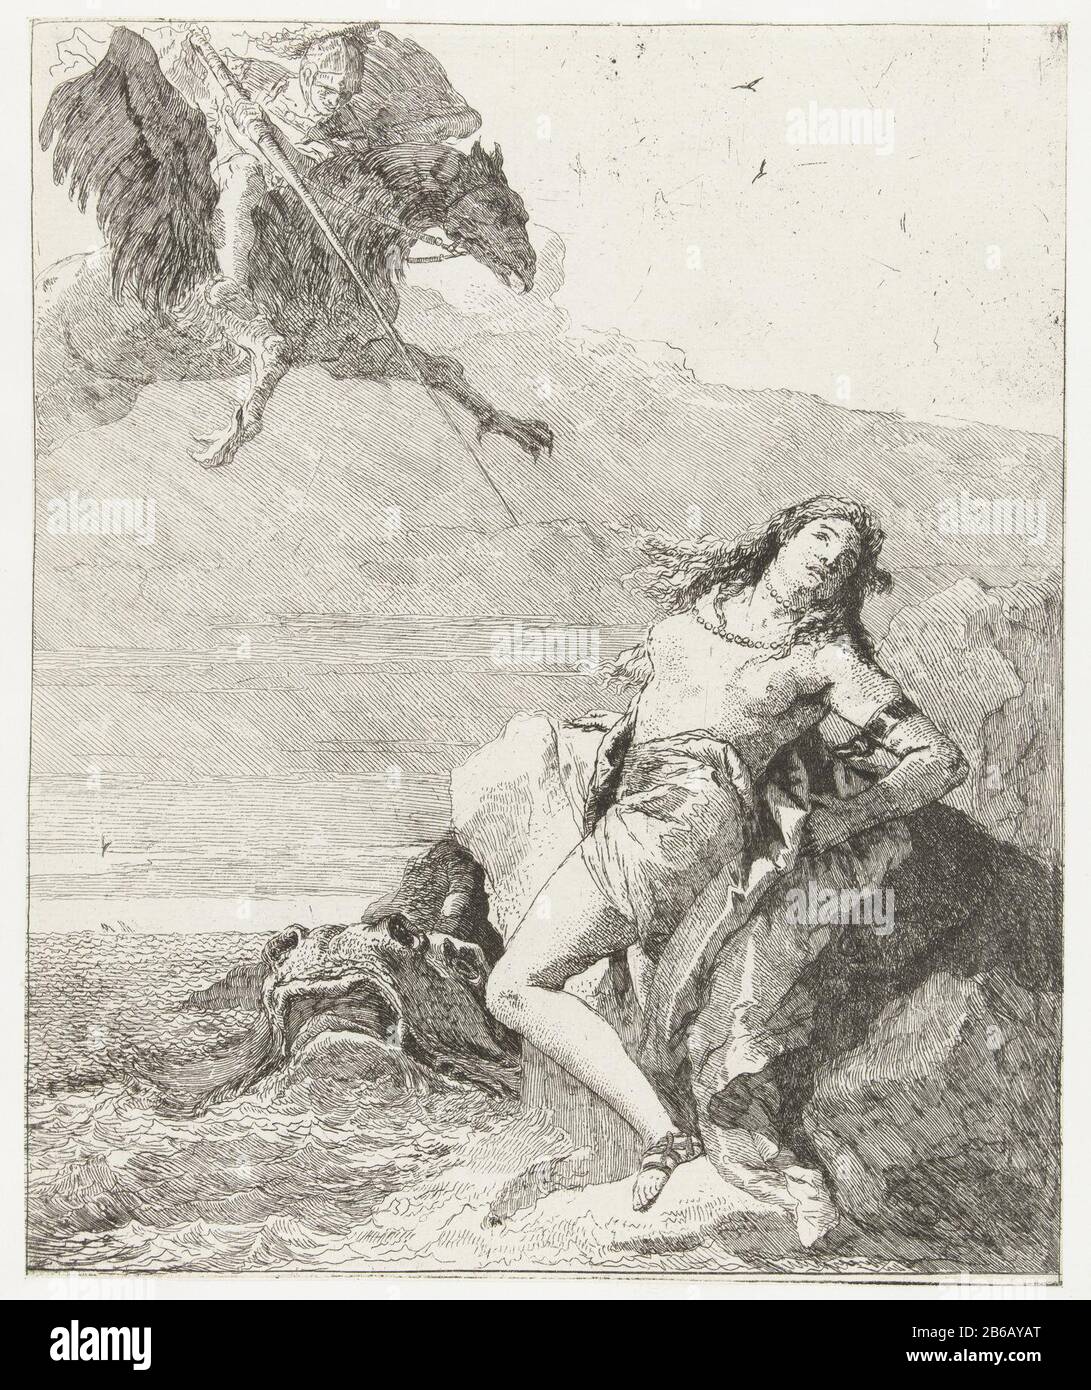 Angelica is threatened by sea monster released by Ruggiero on hippogriff Angelica is chained to a rock as she is threatened by a sea monster, an ork. It is saved by Ruggiero which comes aangesneld on the back of a hippogrief. Manufacturer : print maker: Giovanni Domenico Tiepolonaar design: Giovanni Battista Tiepolo Dating: 1757 - 1760 Physical characteristics: etching material: paper Technique: etching dimensions: sheet: h 245 mm × W 201 mmToelichtingPrent to fresco by Giovanni Battista Tiepolo in the Villa Valmarana in Vicenza, dated 1757. Subject: AngelicaRuggiero'hippogriffe (horse / eagle Stock Photo